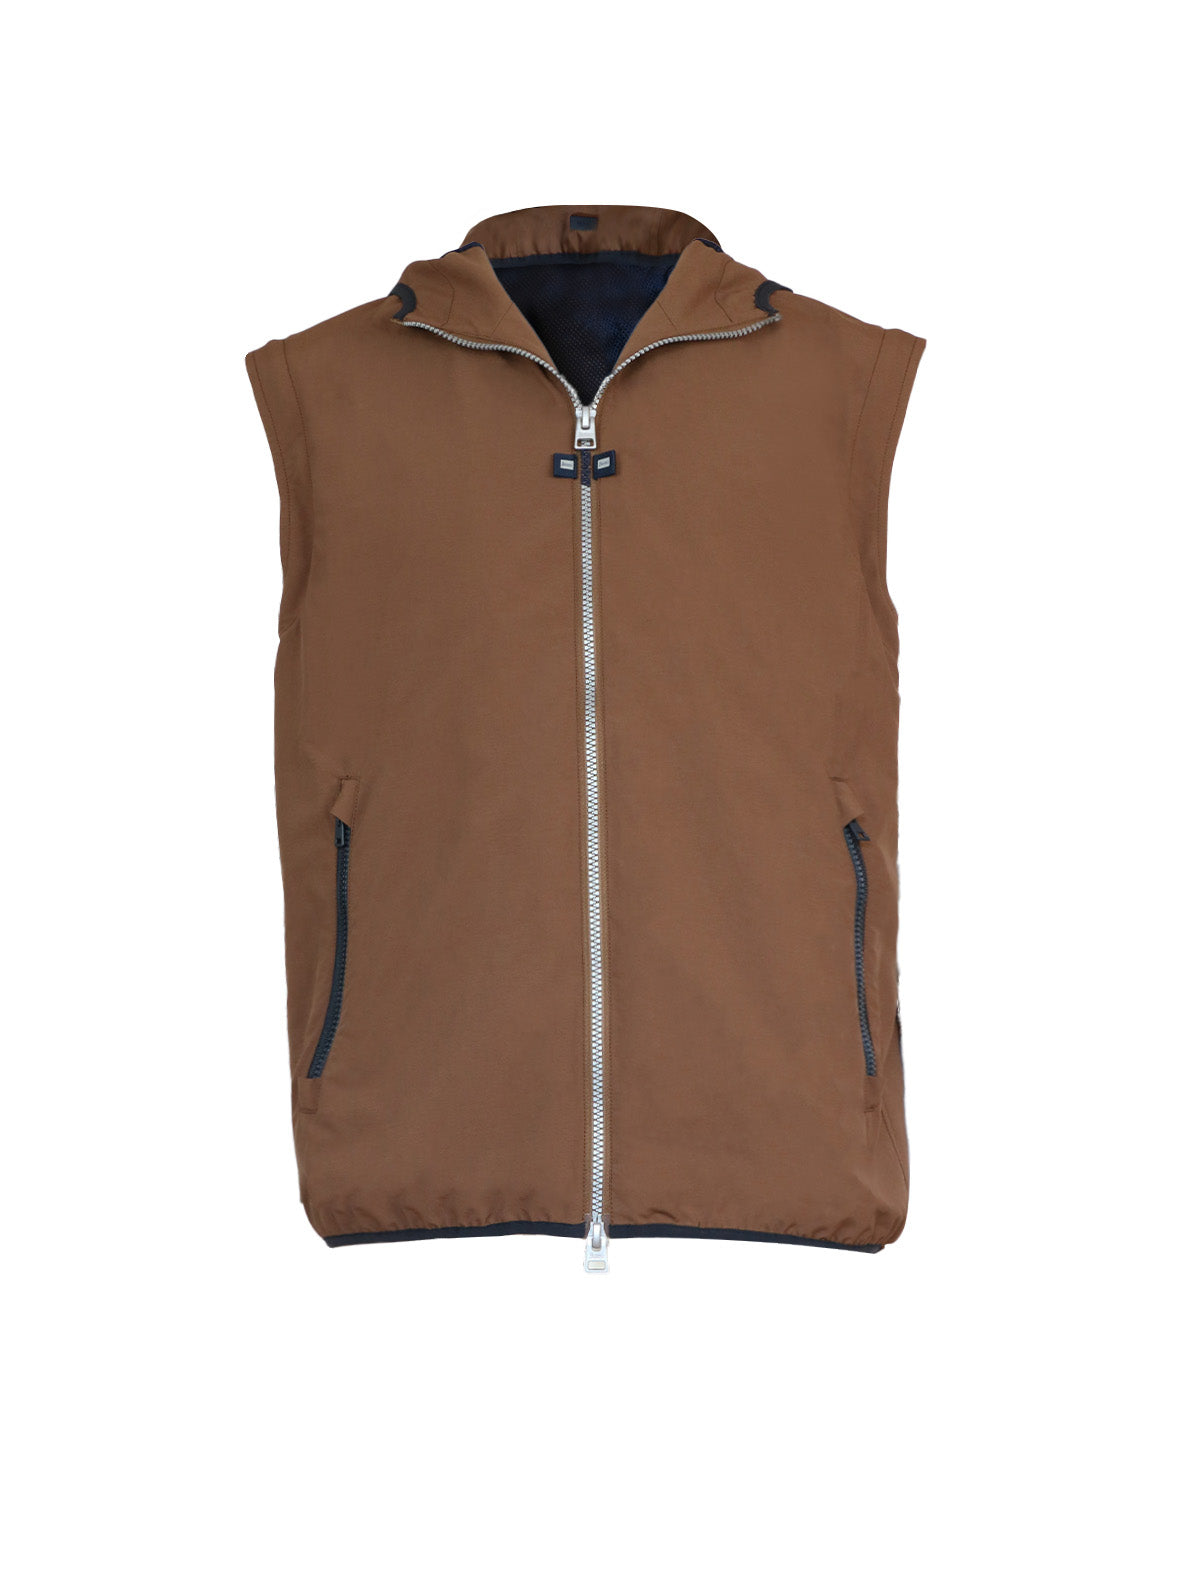 HERNO Zip-Out Plaster Bomber Jacket in Copper Brown